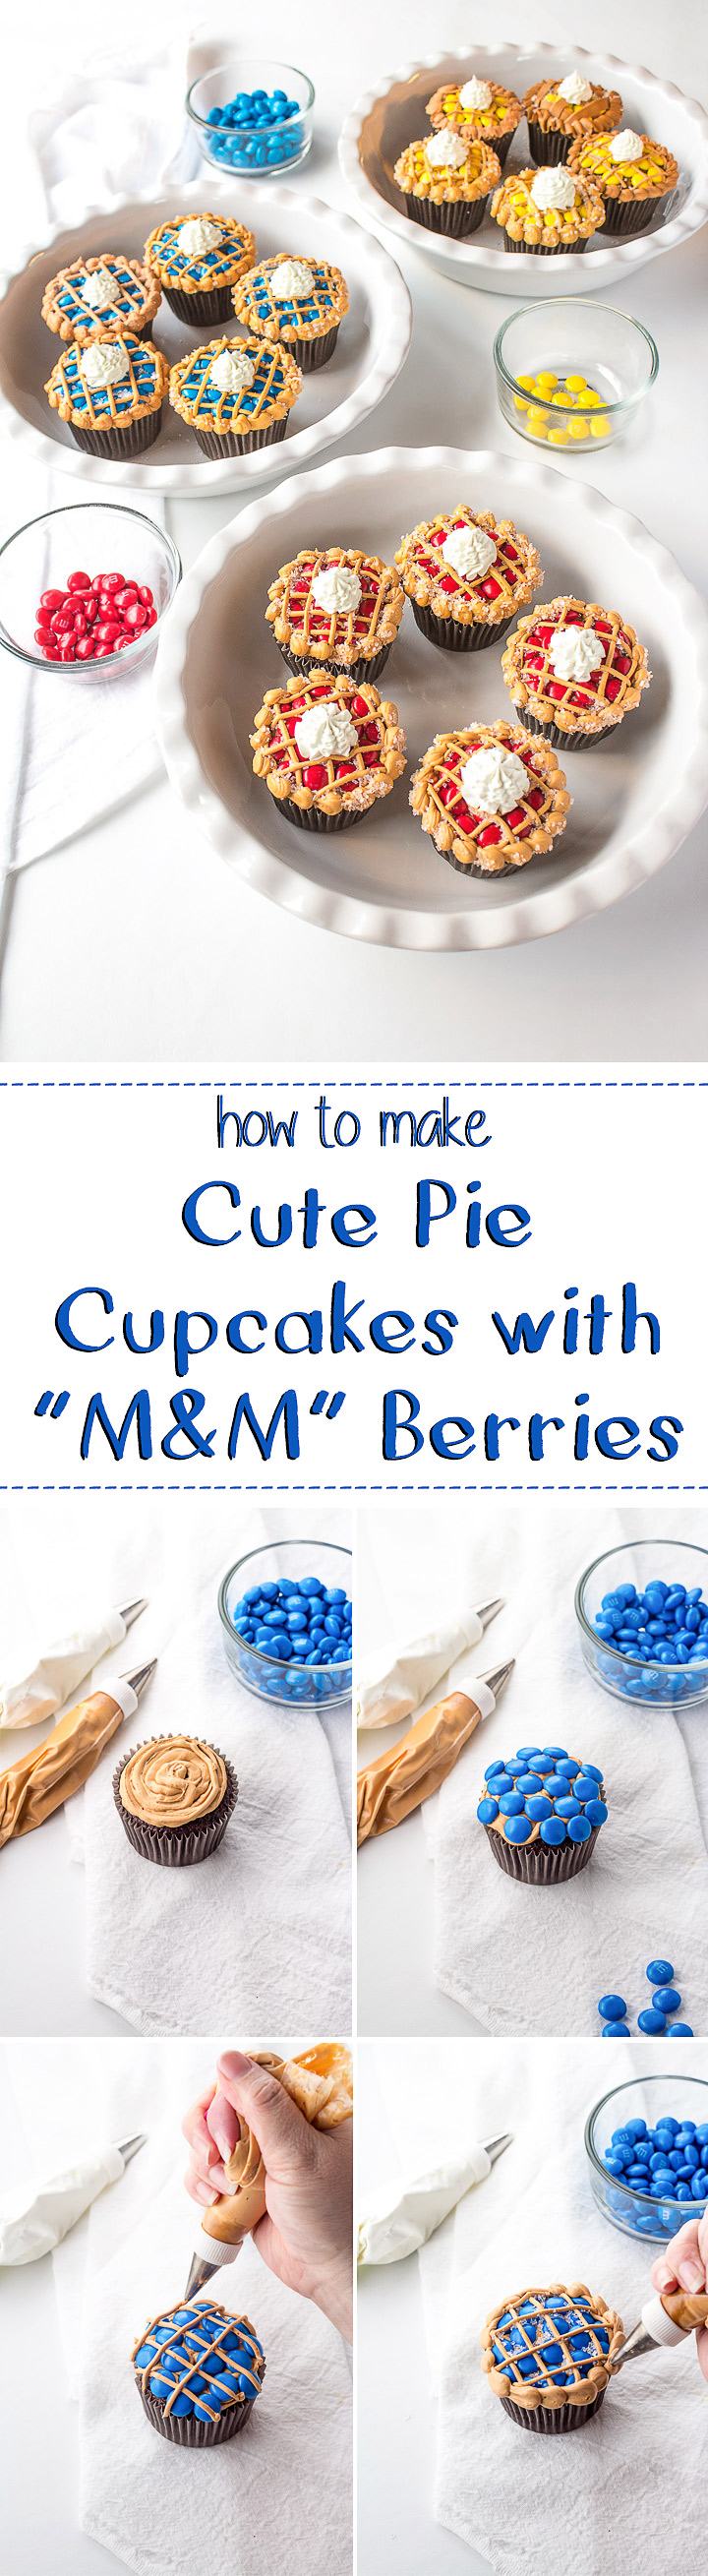 How to Make Cute Pie Cupcakes with M&M's | The Bearfoot Baker